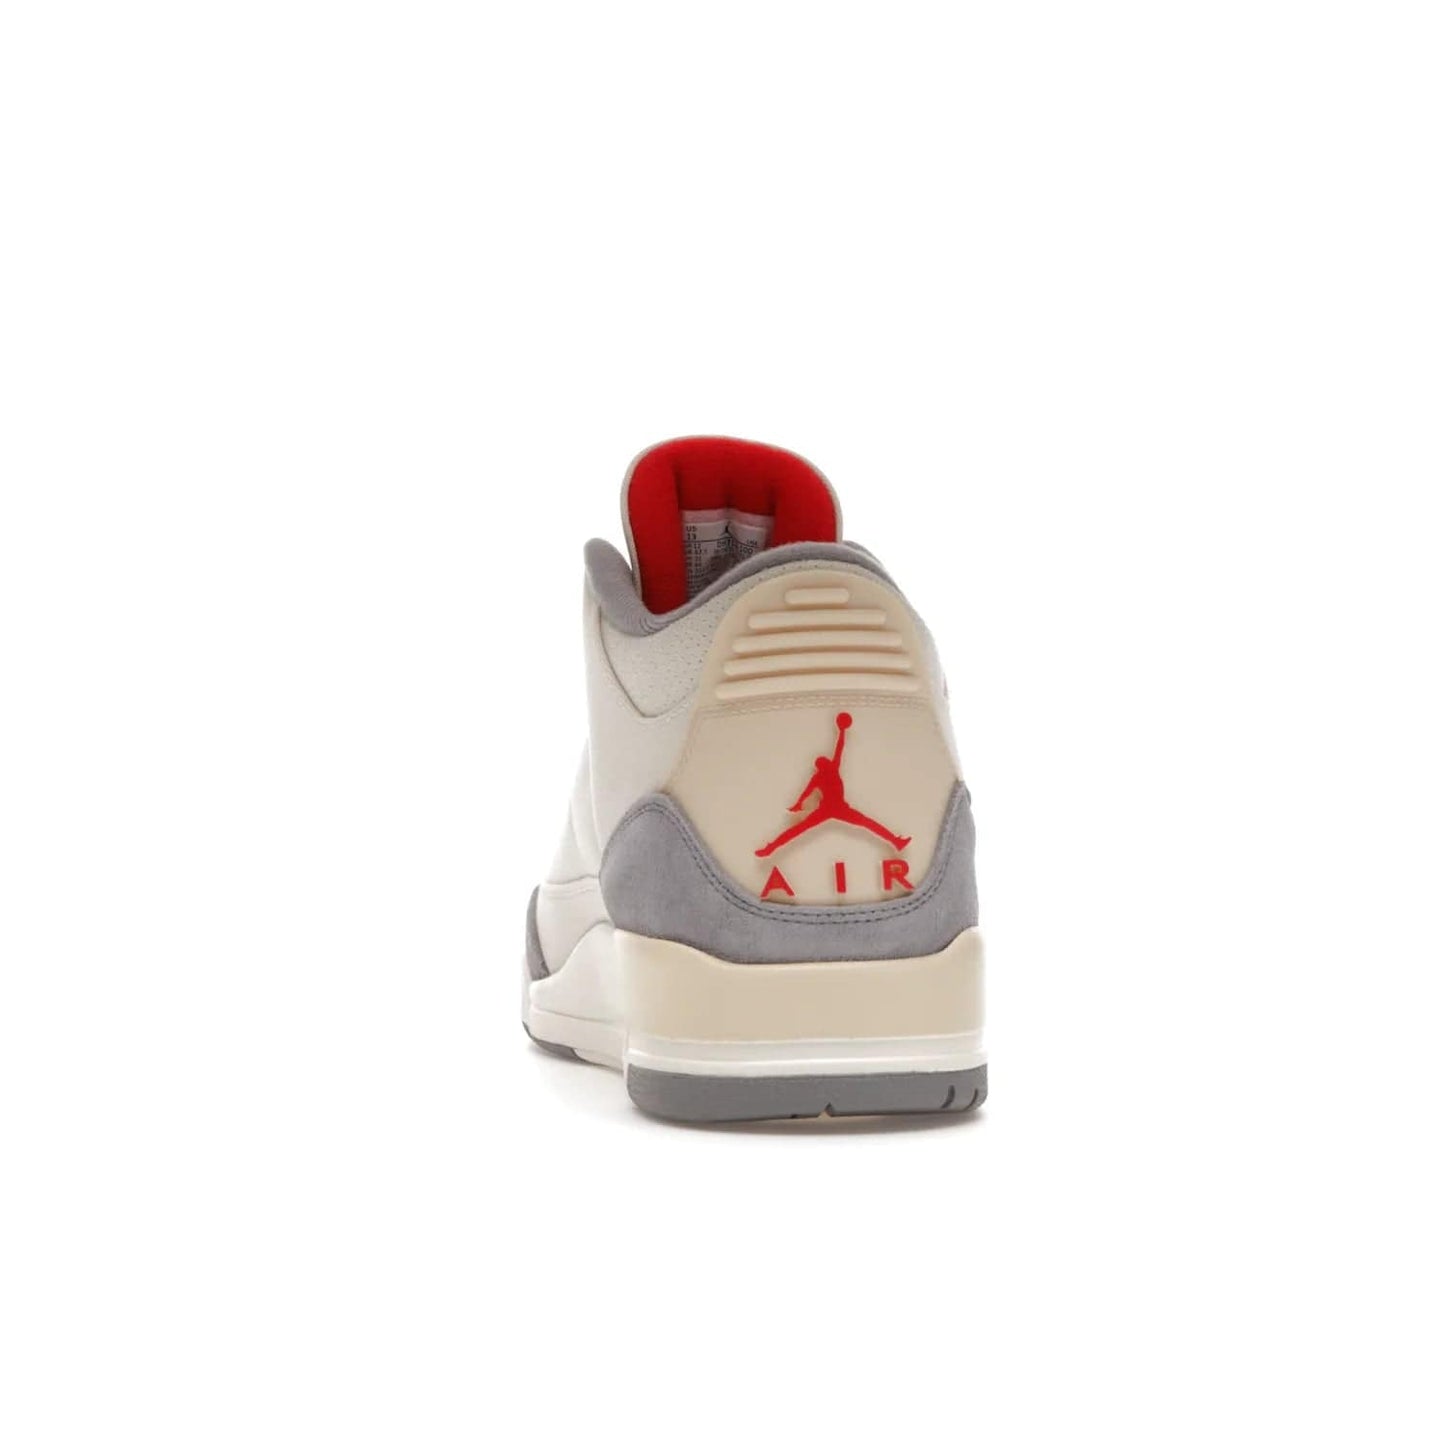 Jordan 3 Retro Muslin - Image 27 - Only at www.BallersClubKickz.com - Eye-catching Air Jordan 3 Retro Muslin in a neutral palette of grey, cream, and red. Featuring canvas upper, suede overlays and white/grey Air Max sole. Available in March 2022.